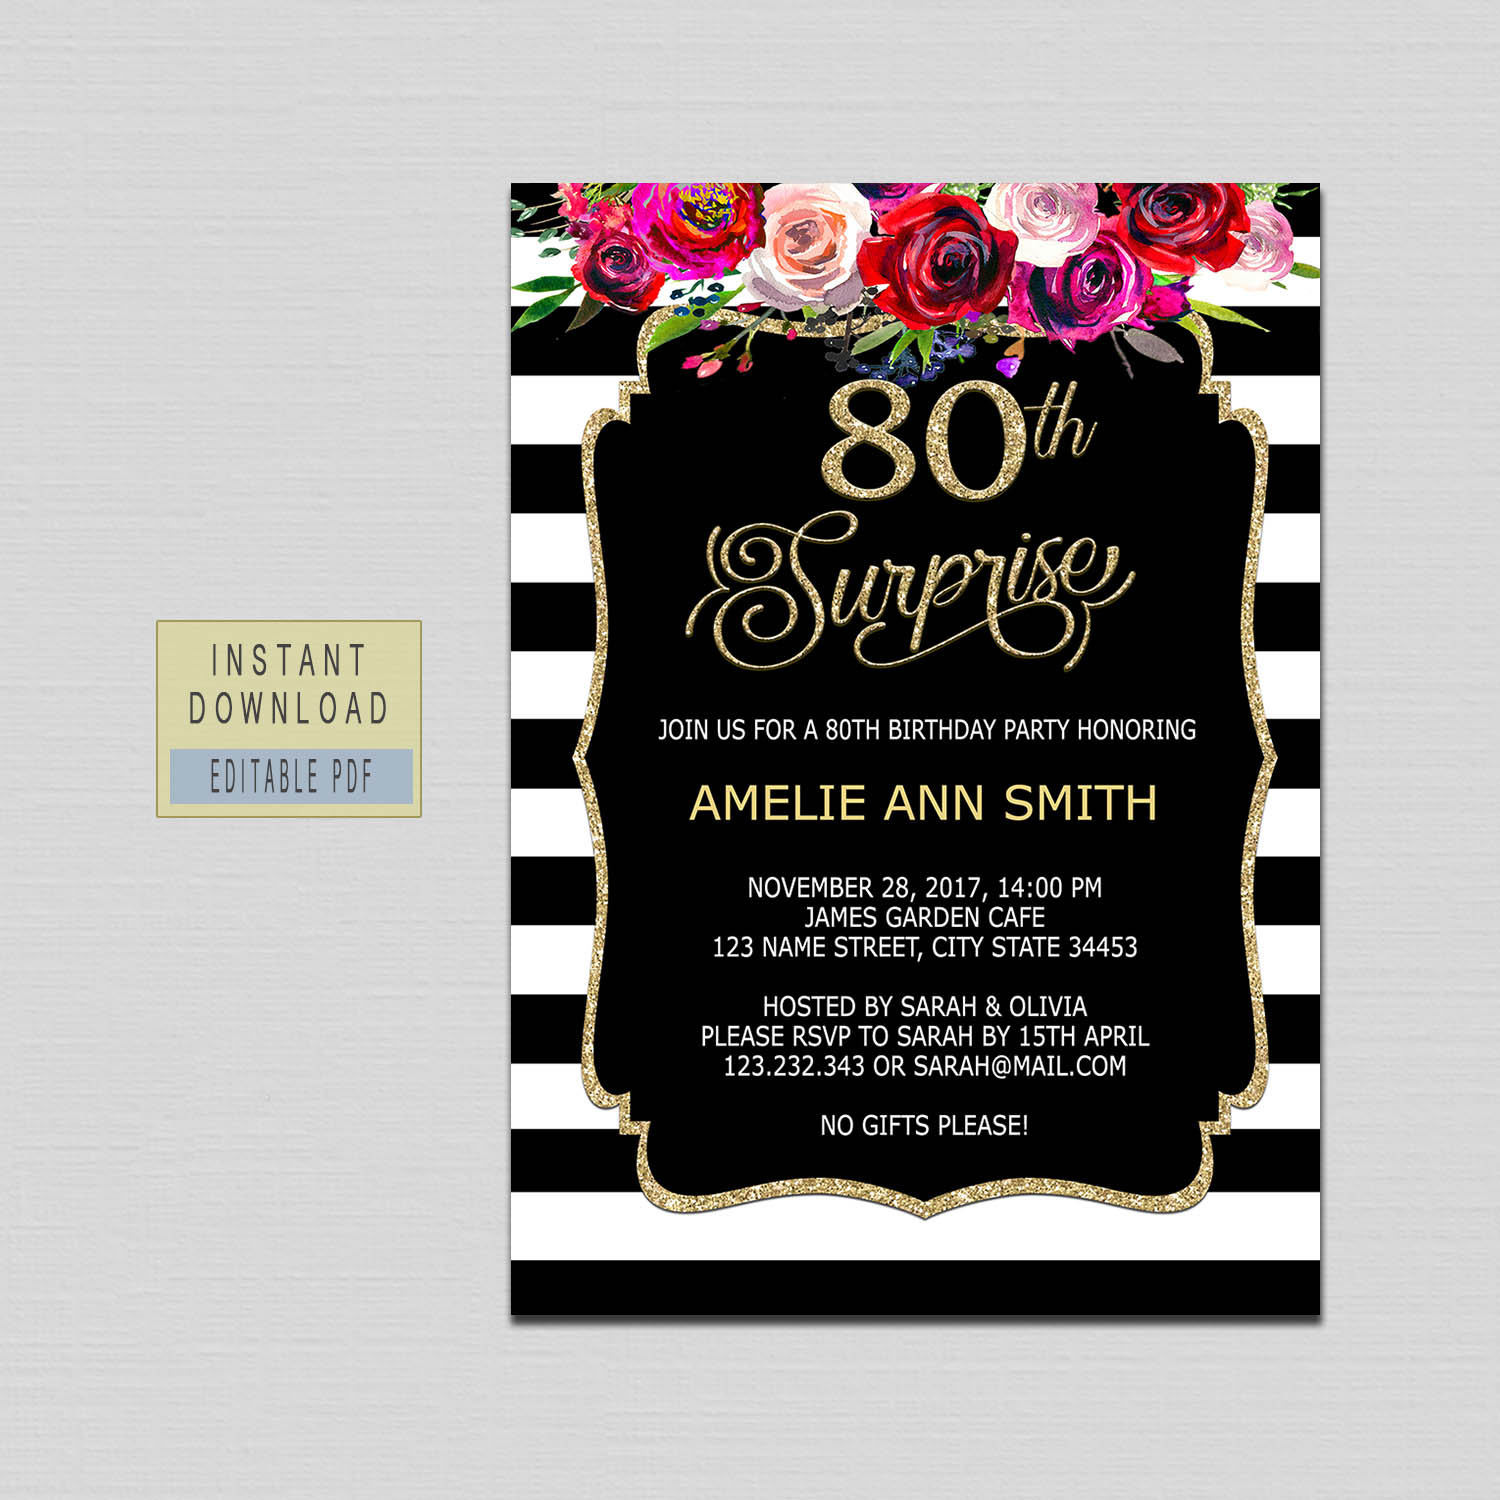 Surprise 80th Birthday Party Invitations
 80th surprise birthday invitation instant 80th